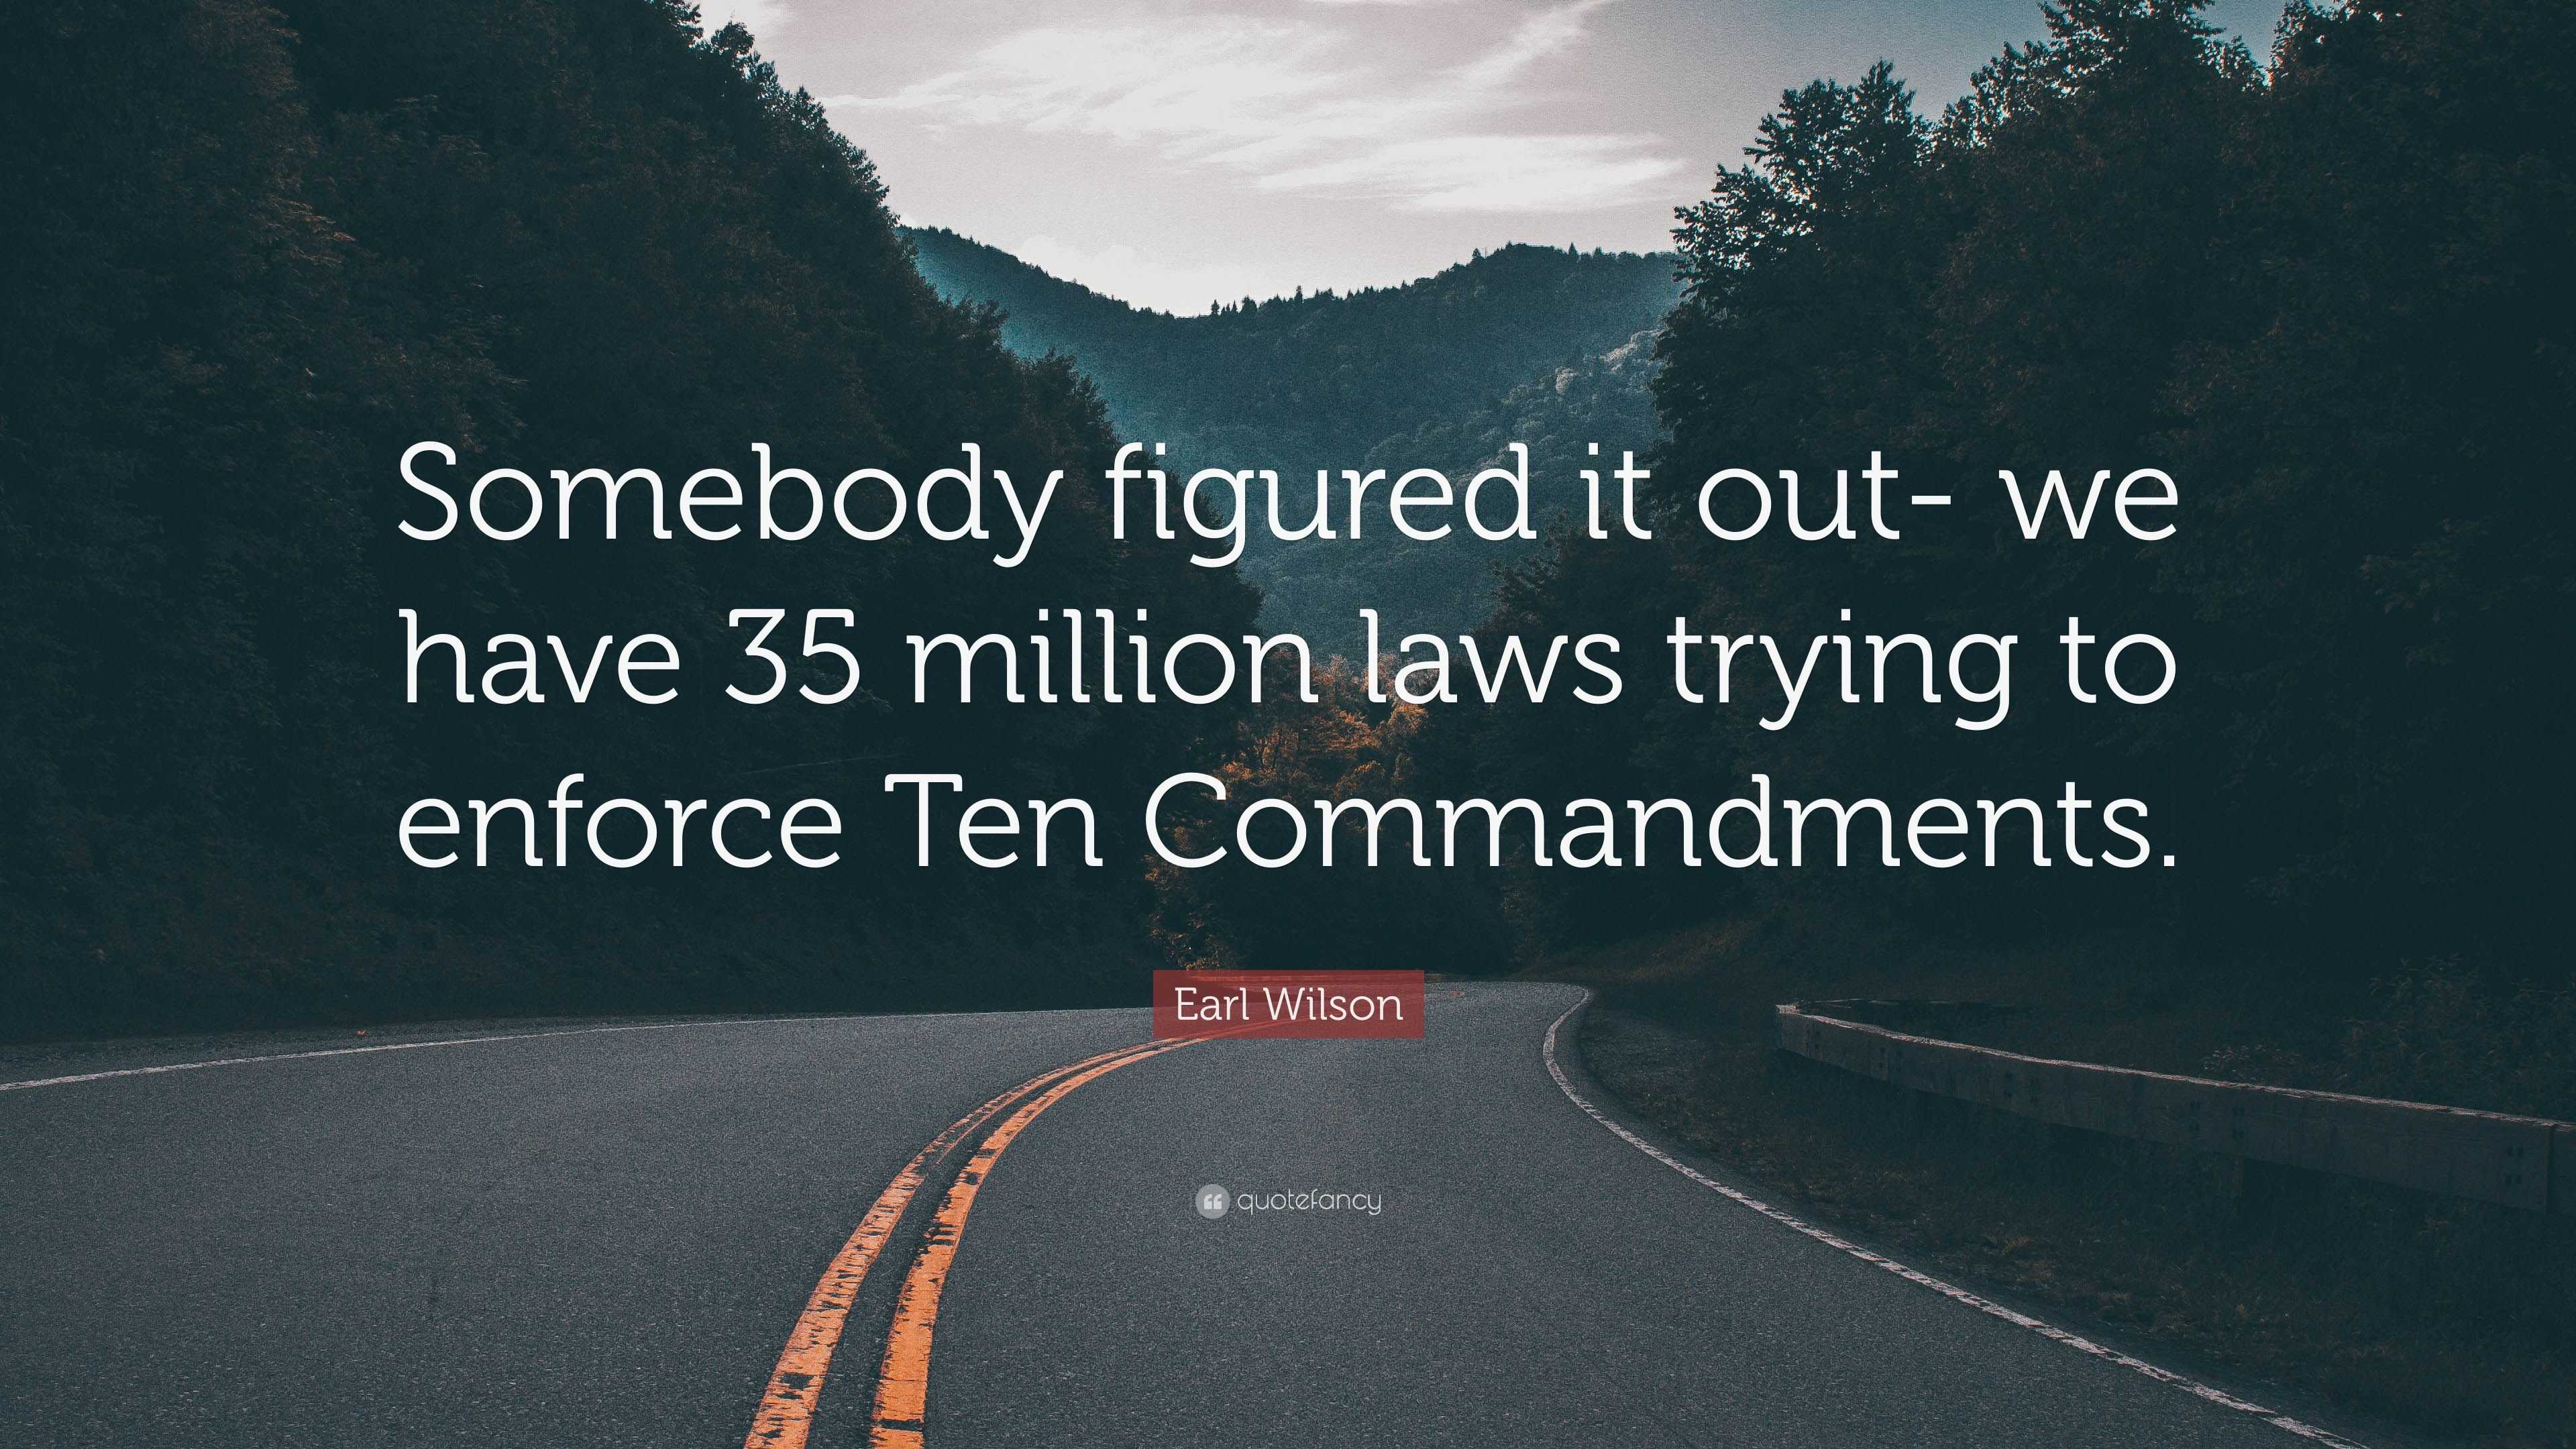 https://quotefancy.com/media/wallpaper/3840x2160/5116978-Earl-Wilson-Quote-Somebody-figured-it-out-we-have-35-million-laws.jpg